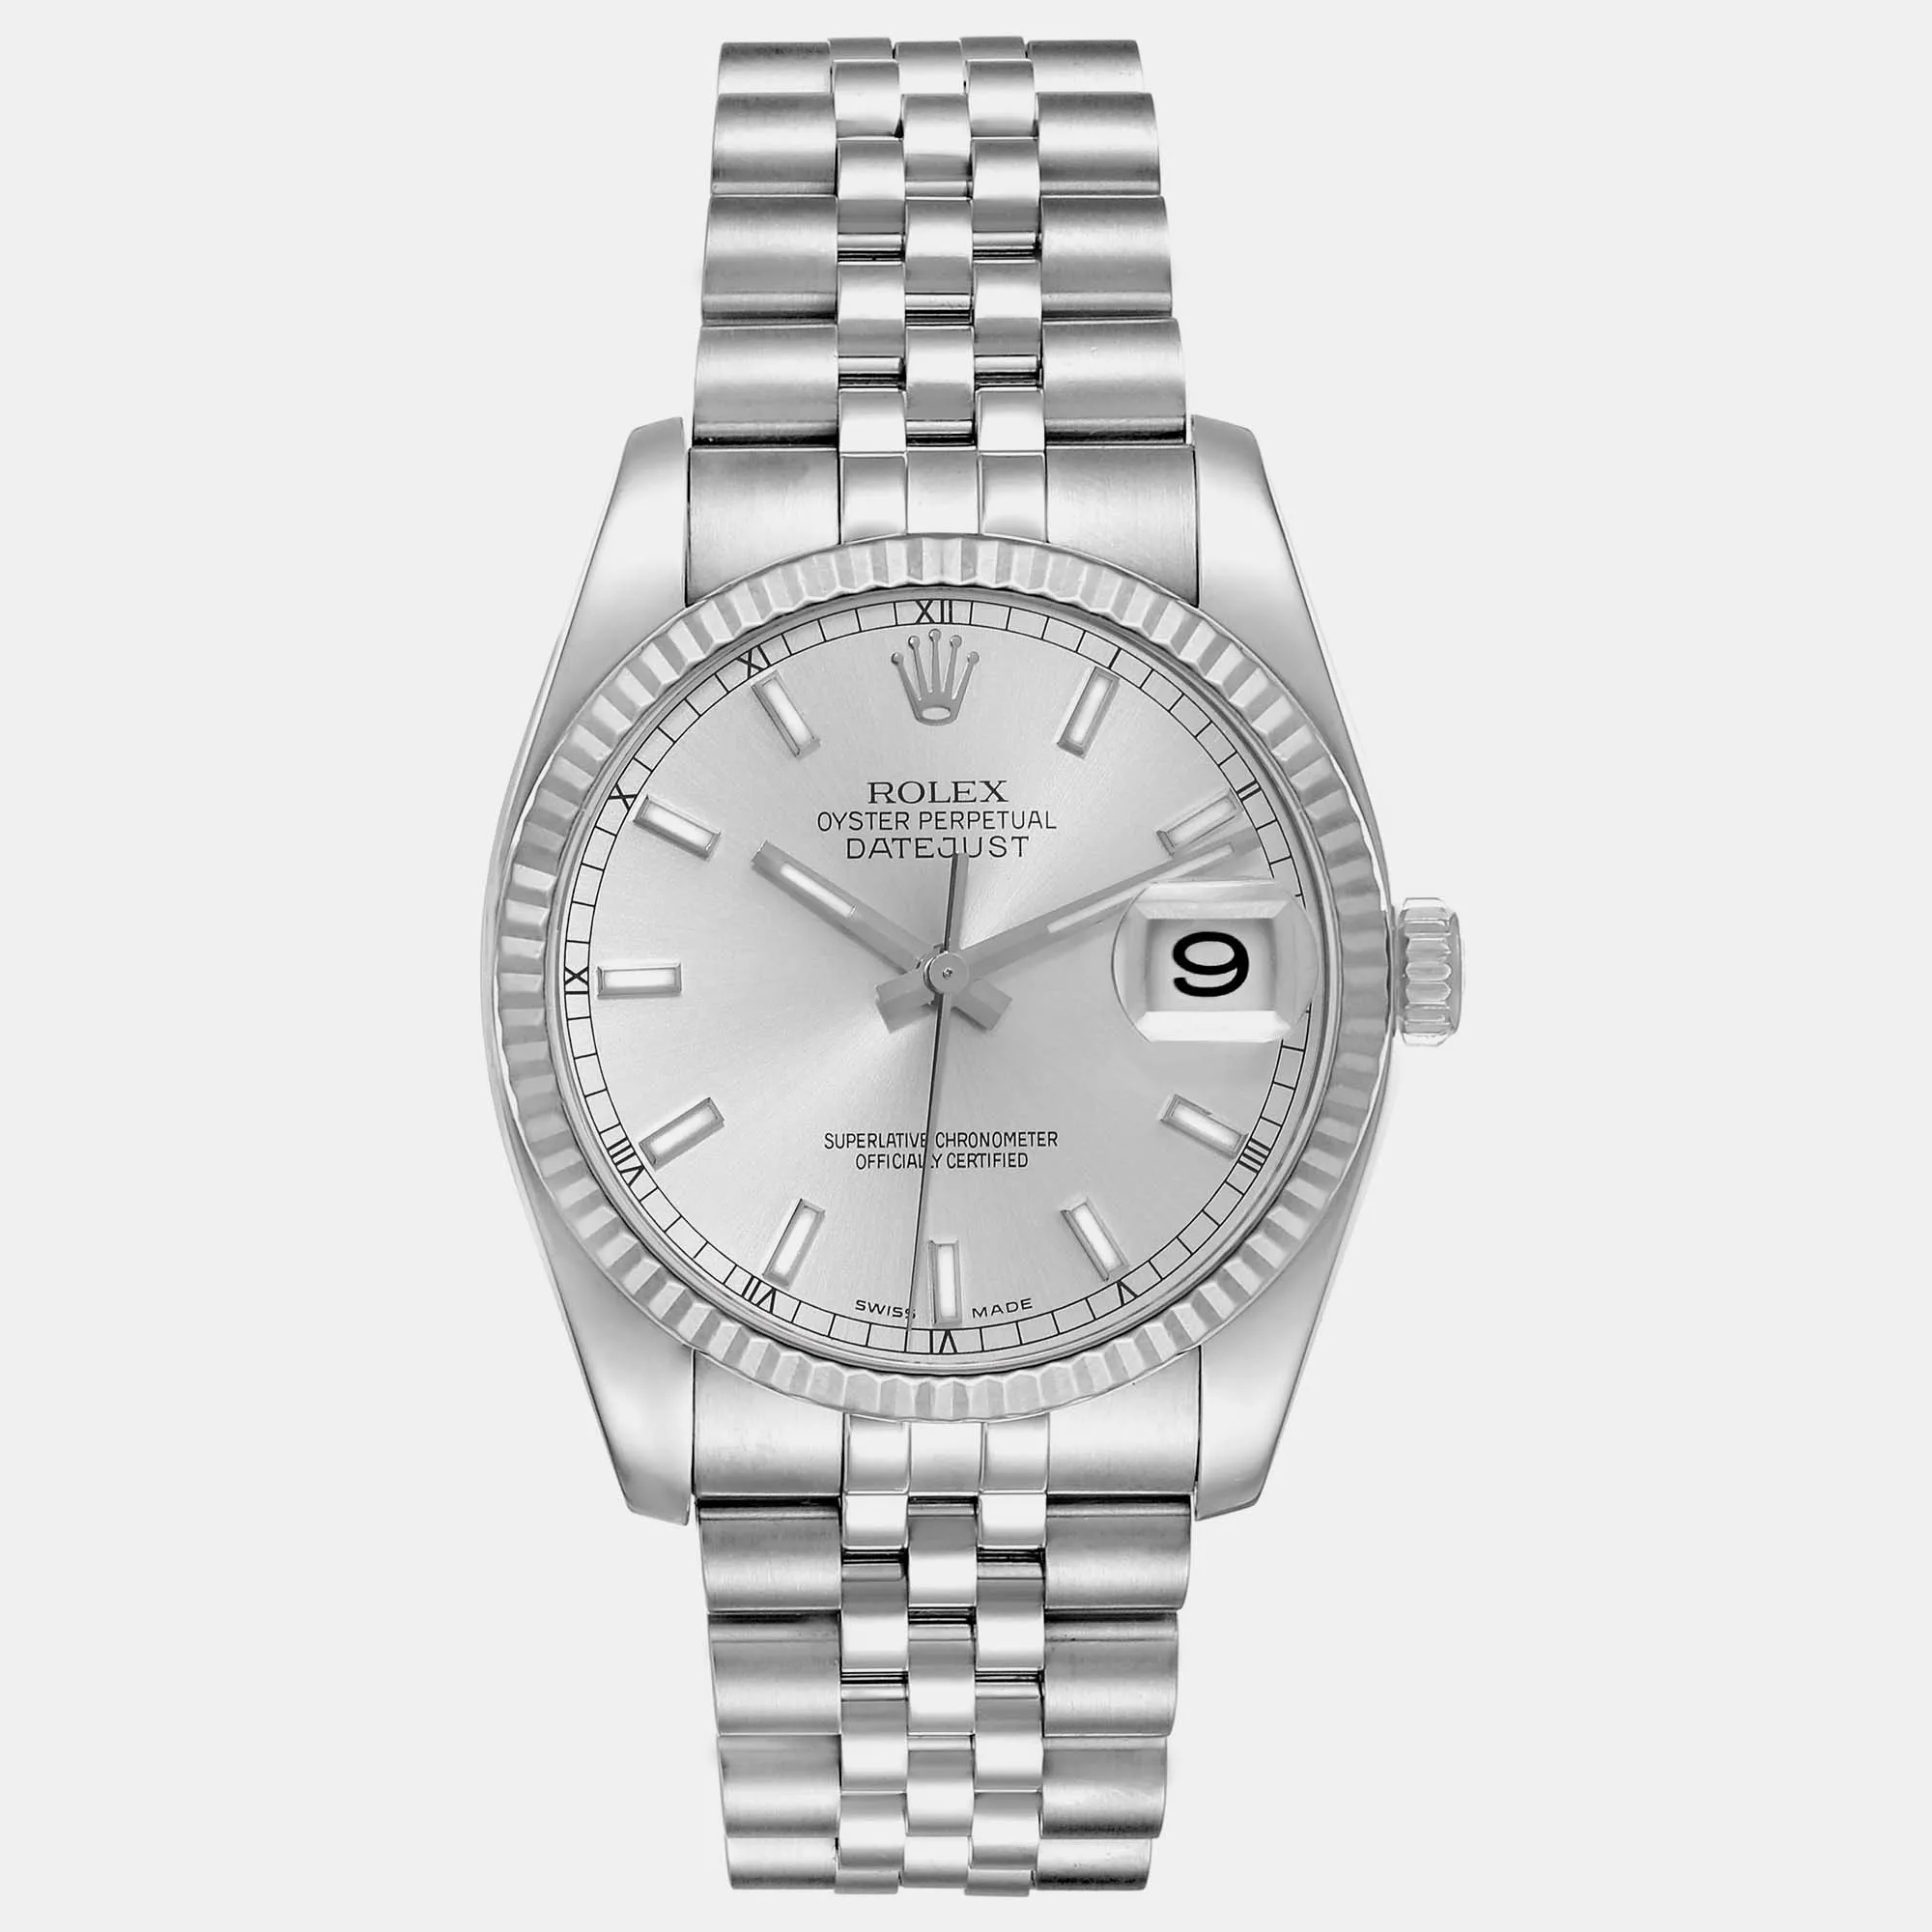 Rolex Datejust 36mm White gold and diamond-set Silver